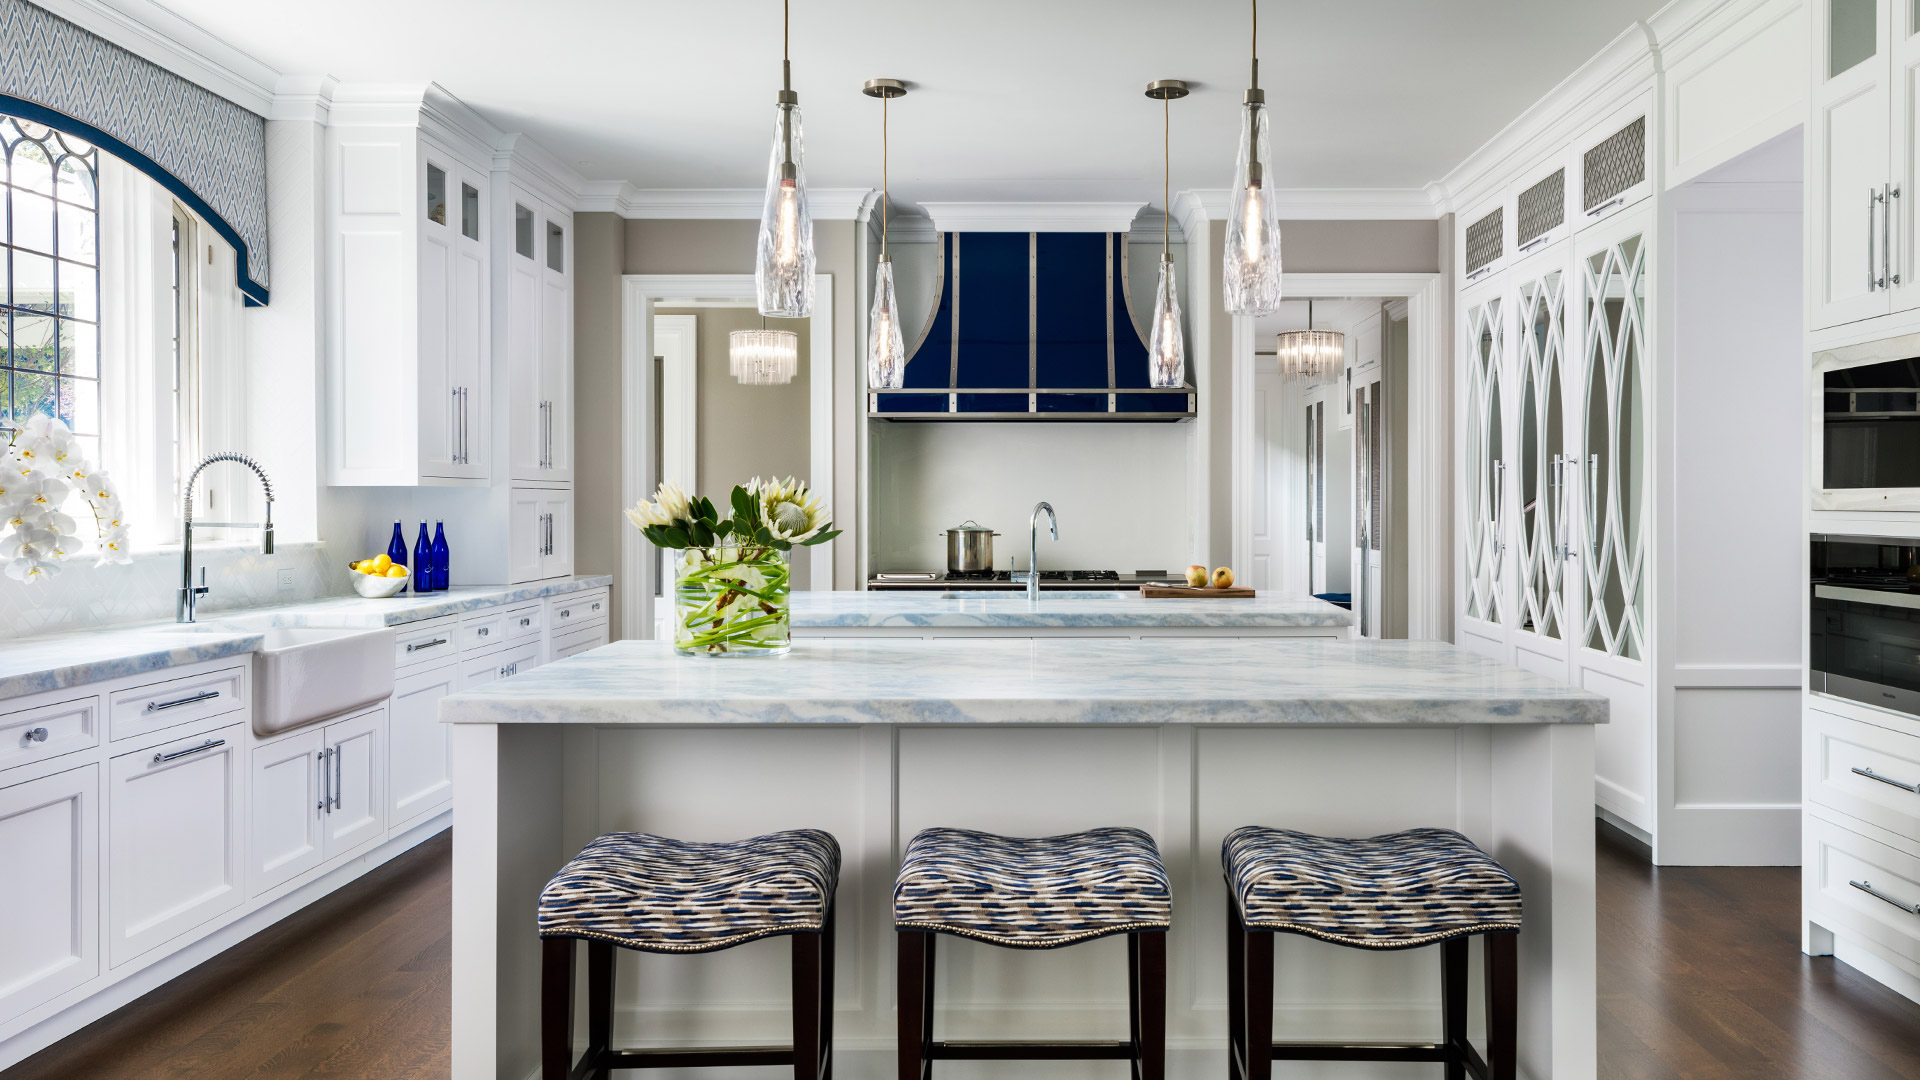 Imperial Blue Transitional Kitchen, Greenwich, CT